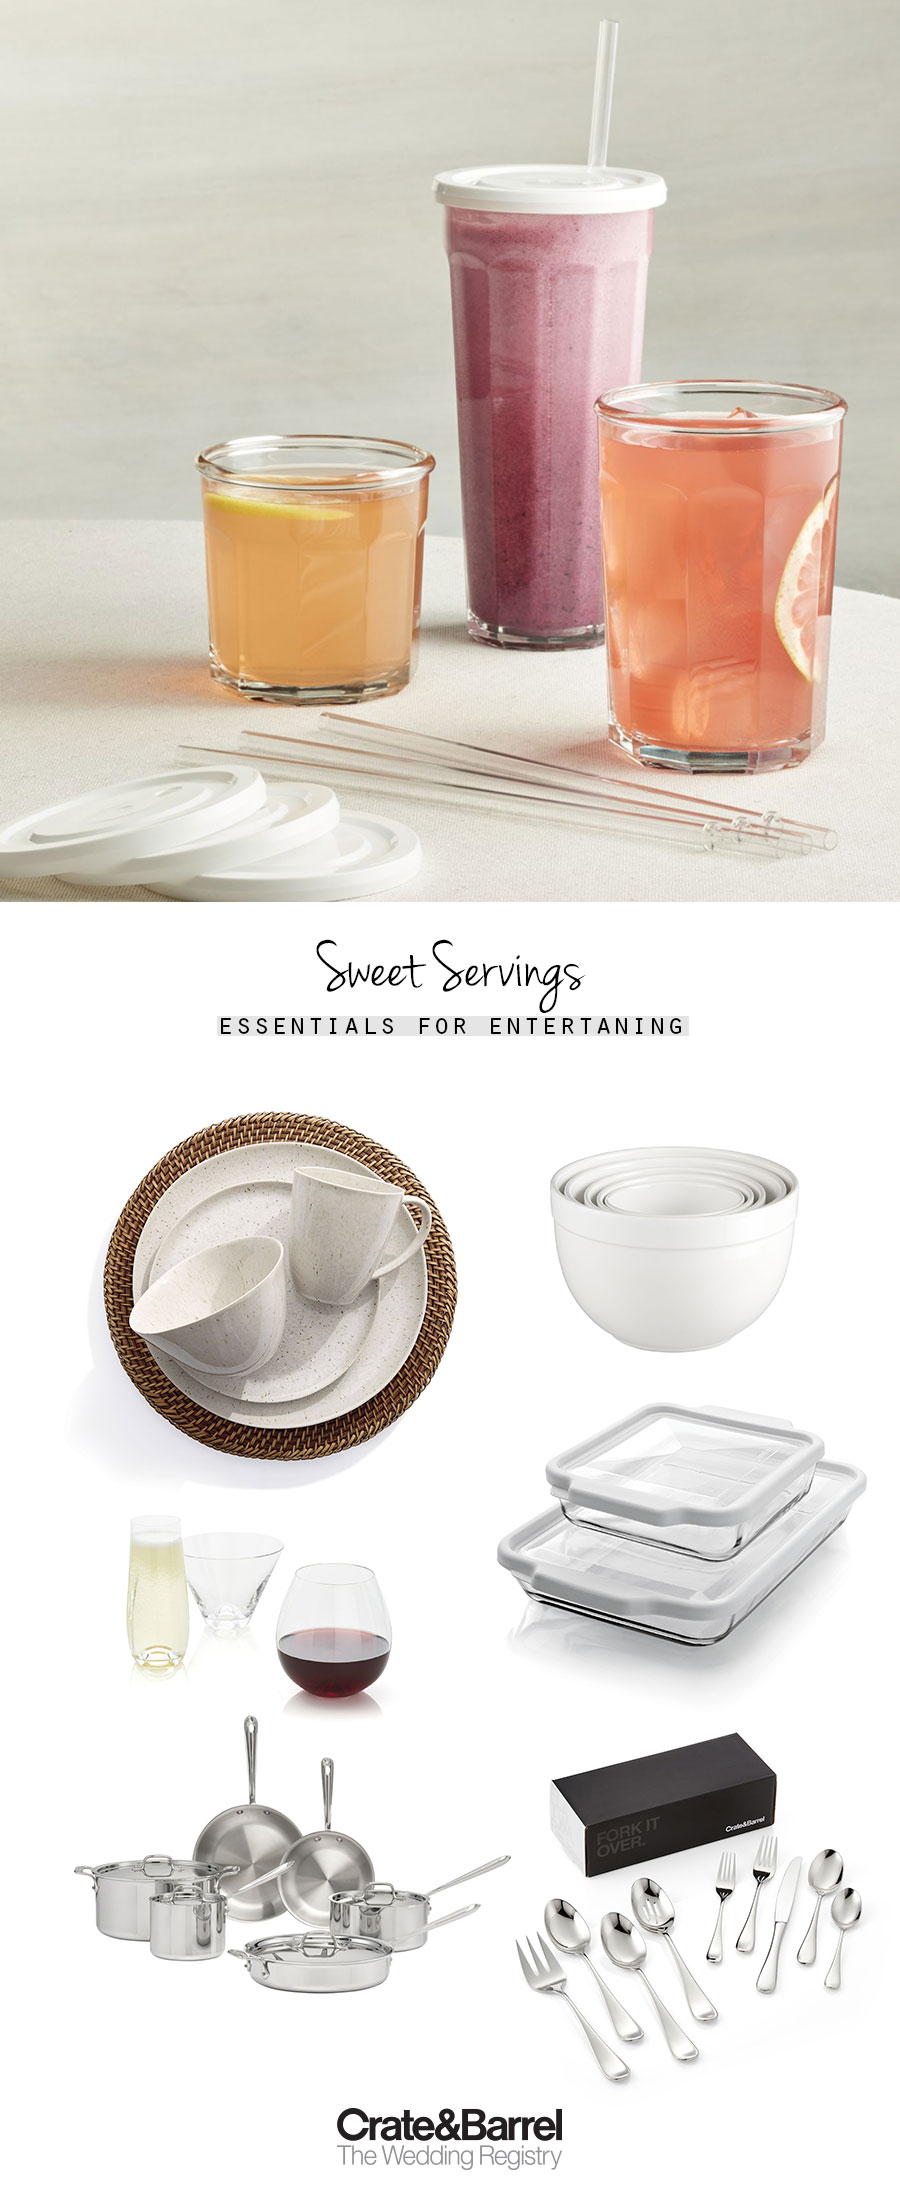 crate and barrel the wedding registry essentials for entertaining